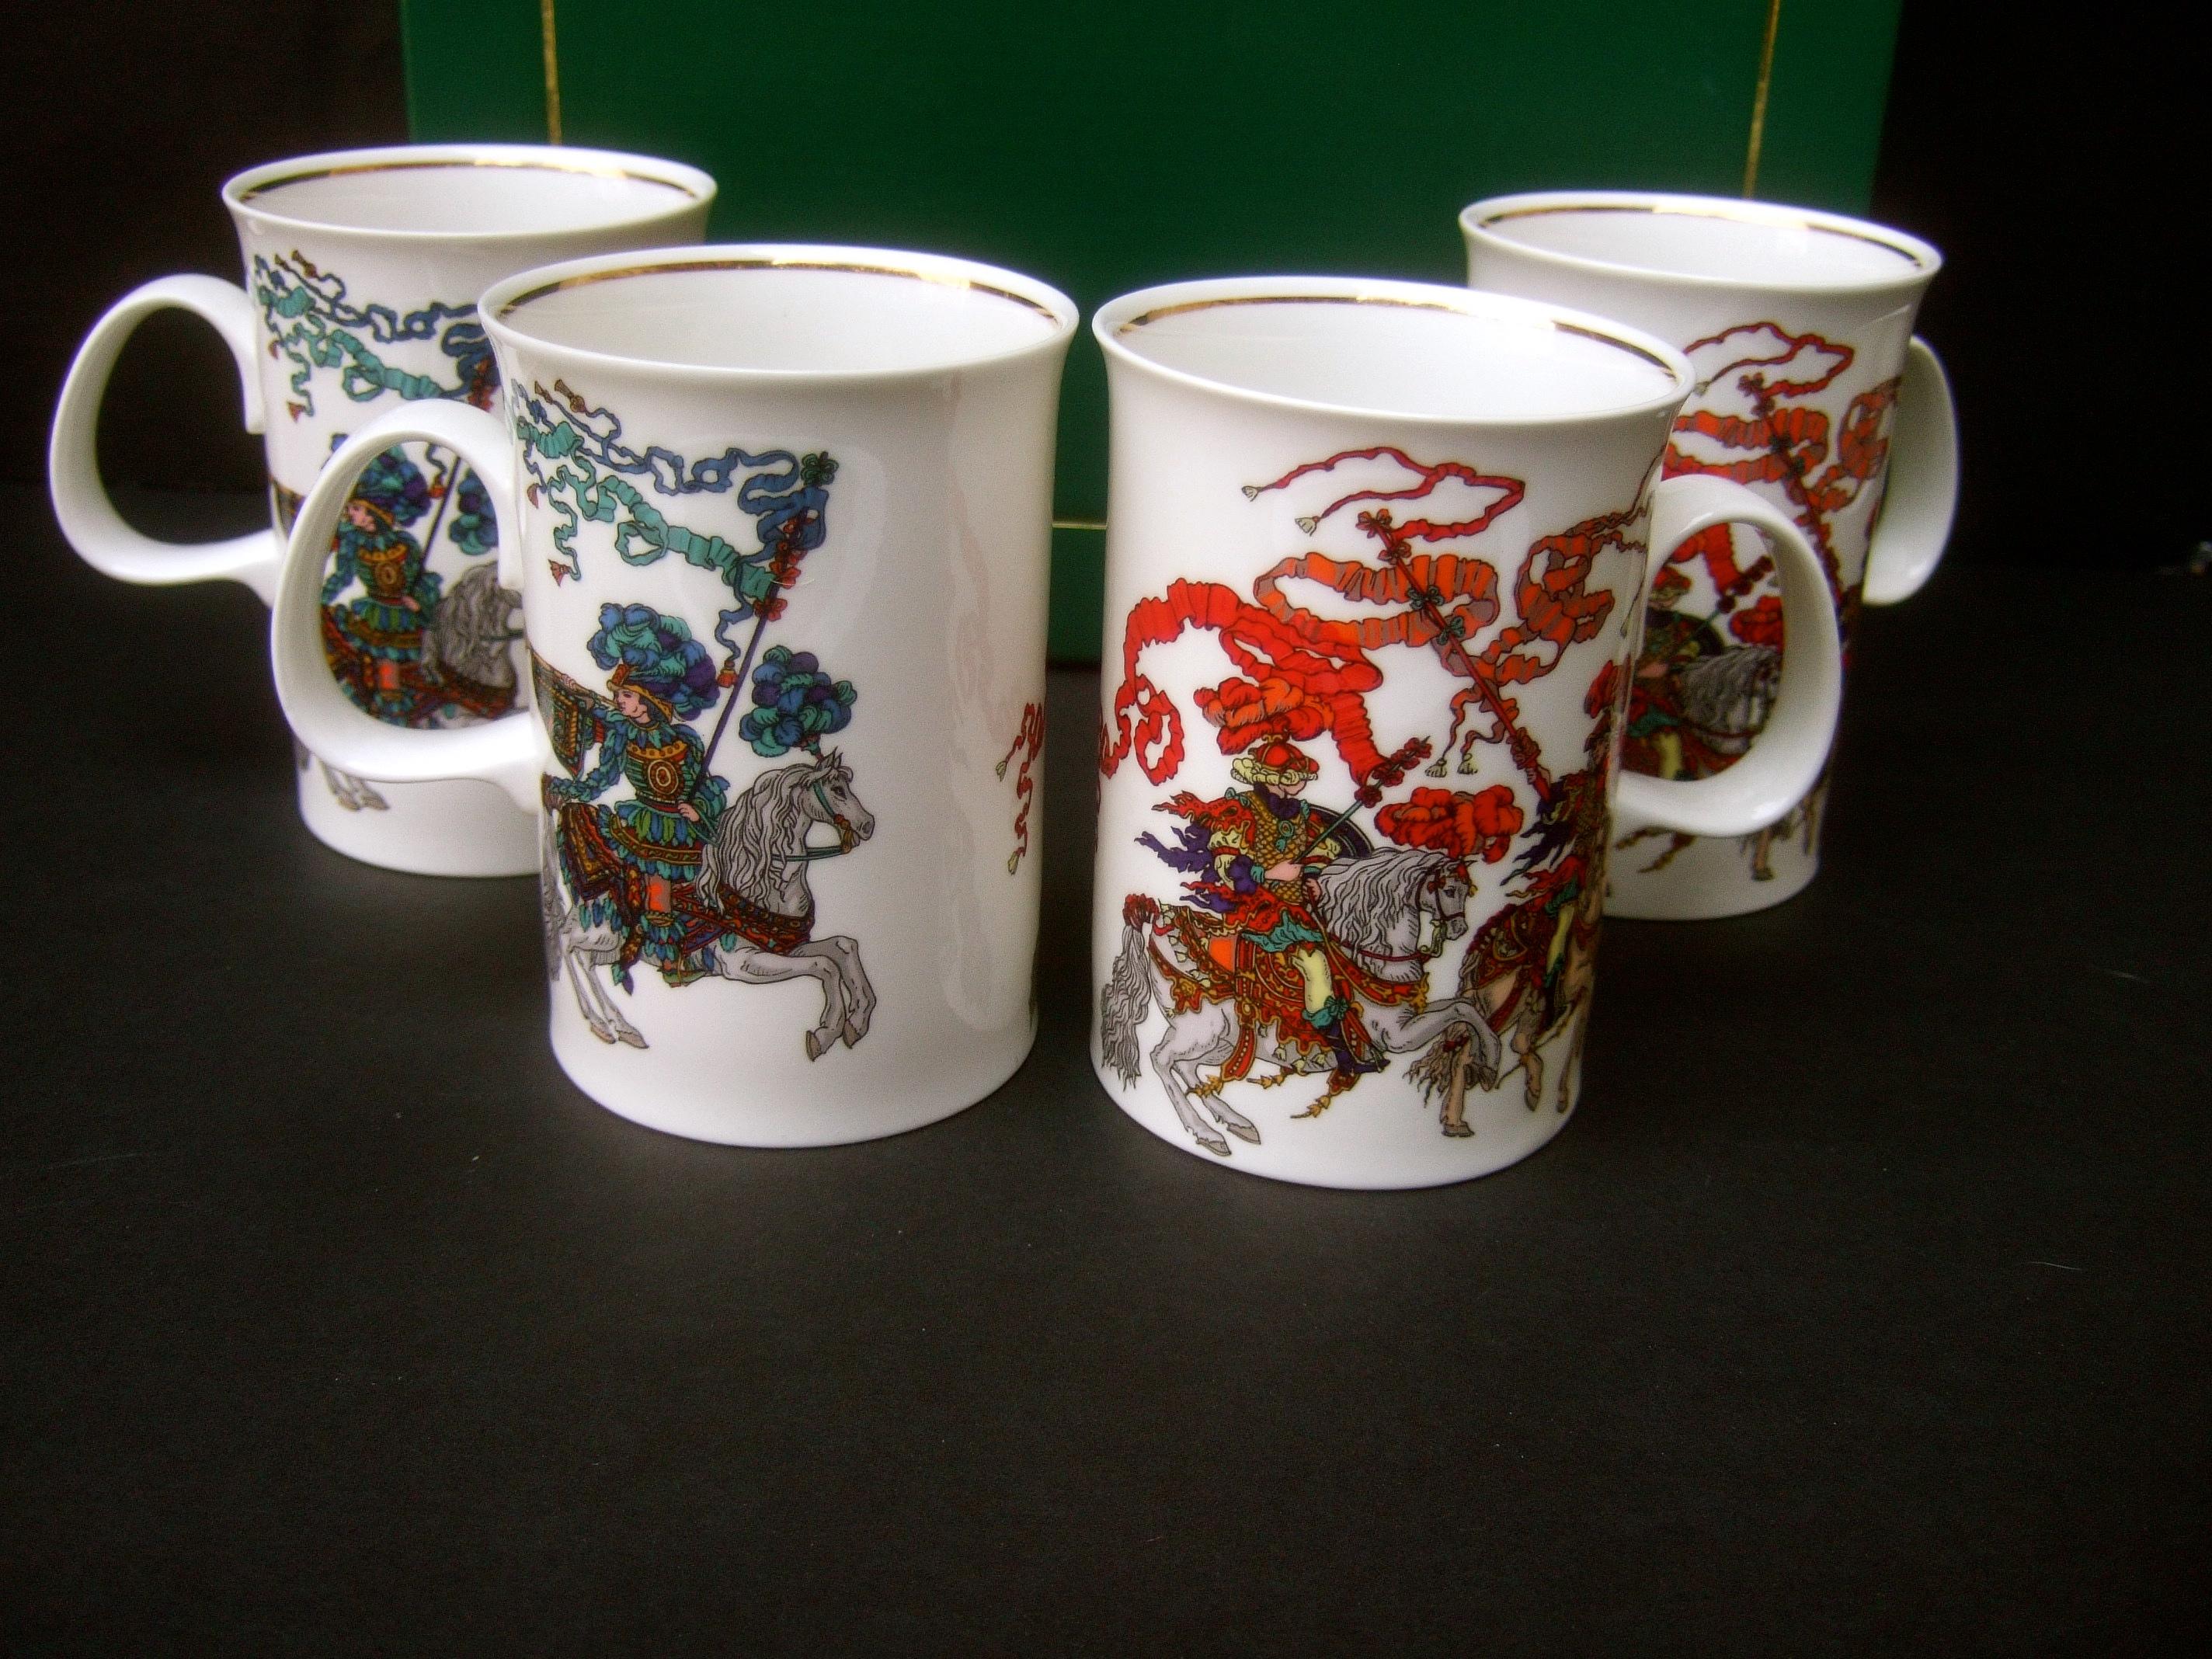 Gucci Set of four English bone China mugs in Gucci cardboard presentation box c 1980

The four porcelain mugs are embellished with enamel stenciling that depicts English knights mounted on their horses
The stenciled scenes depict a different scene